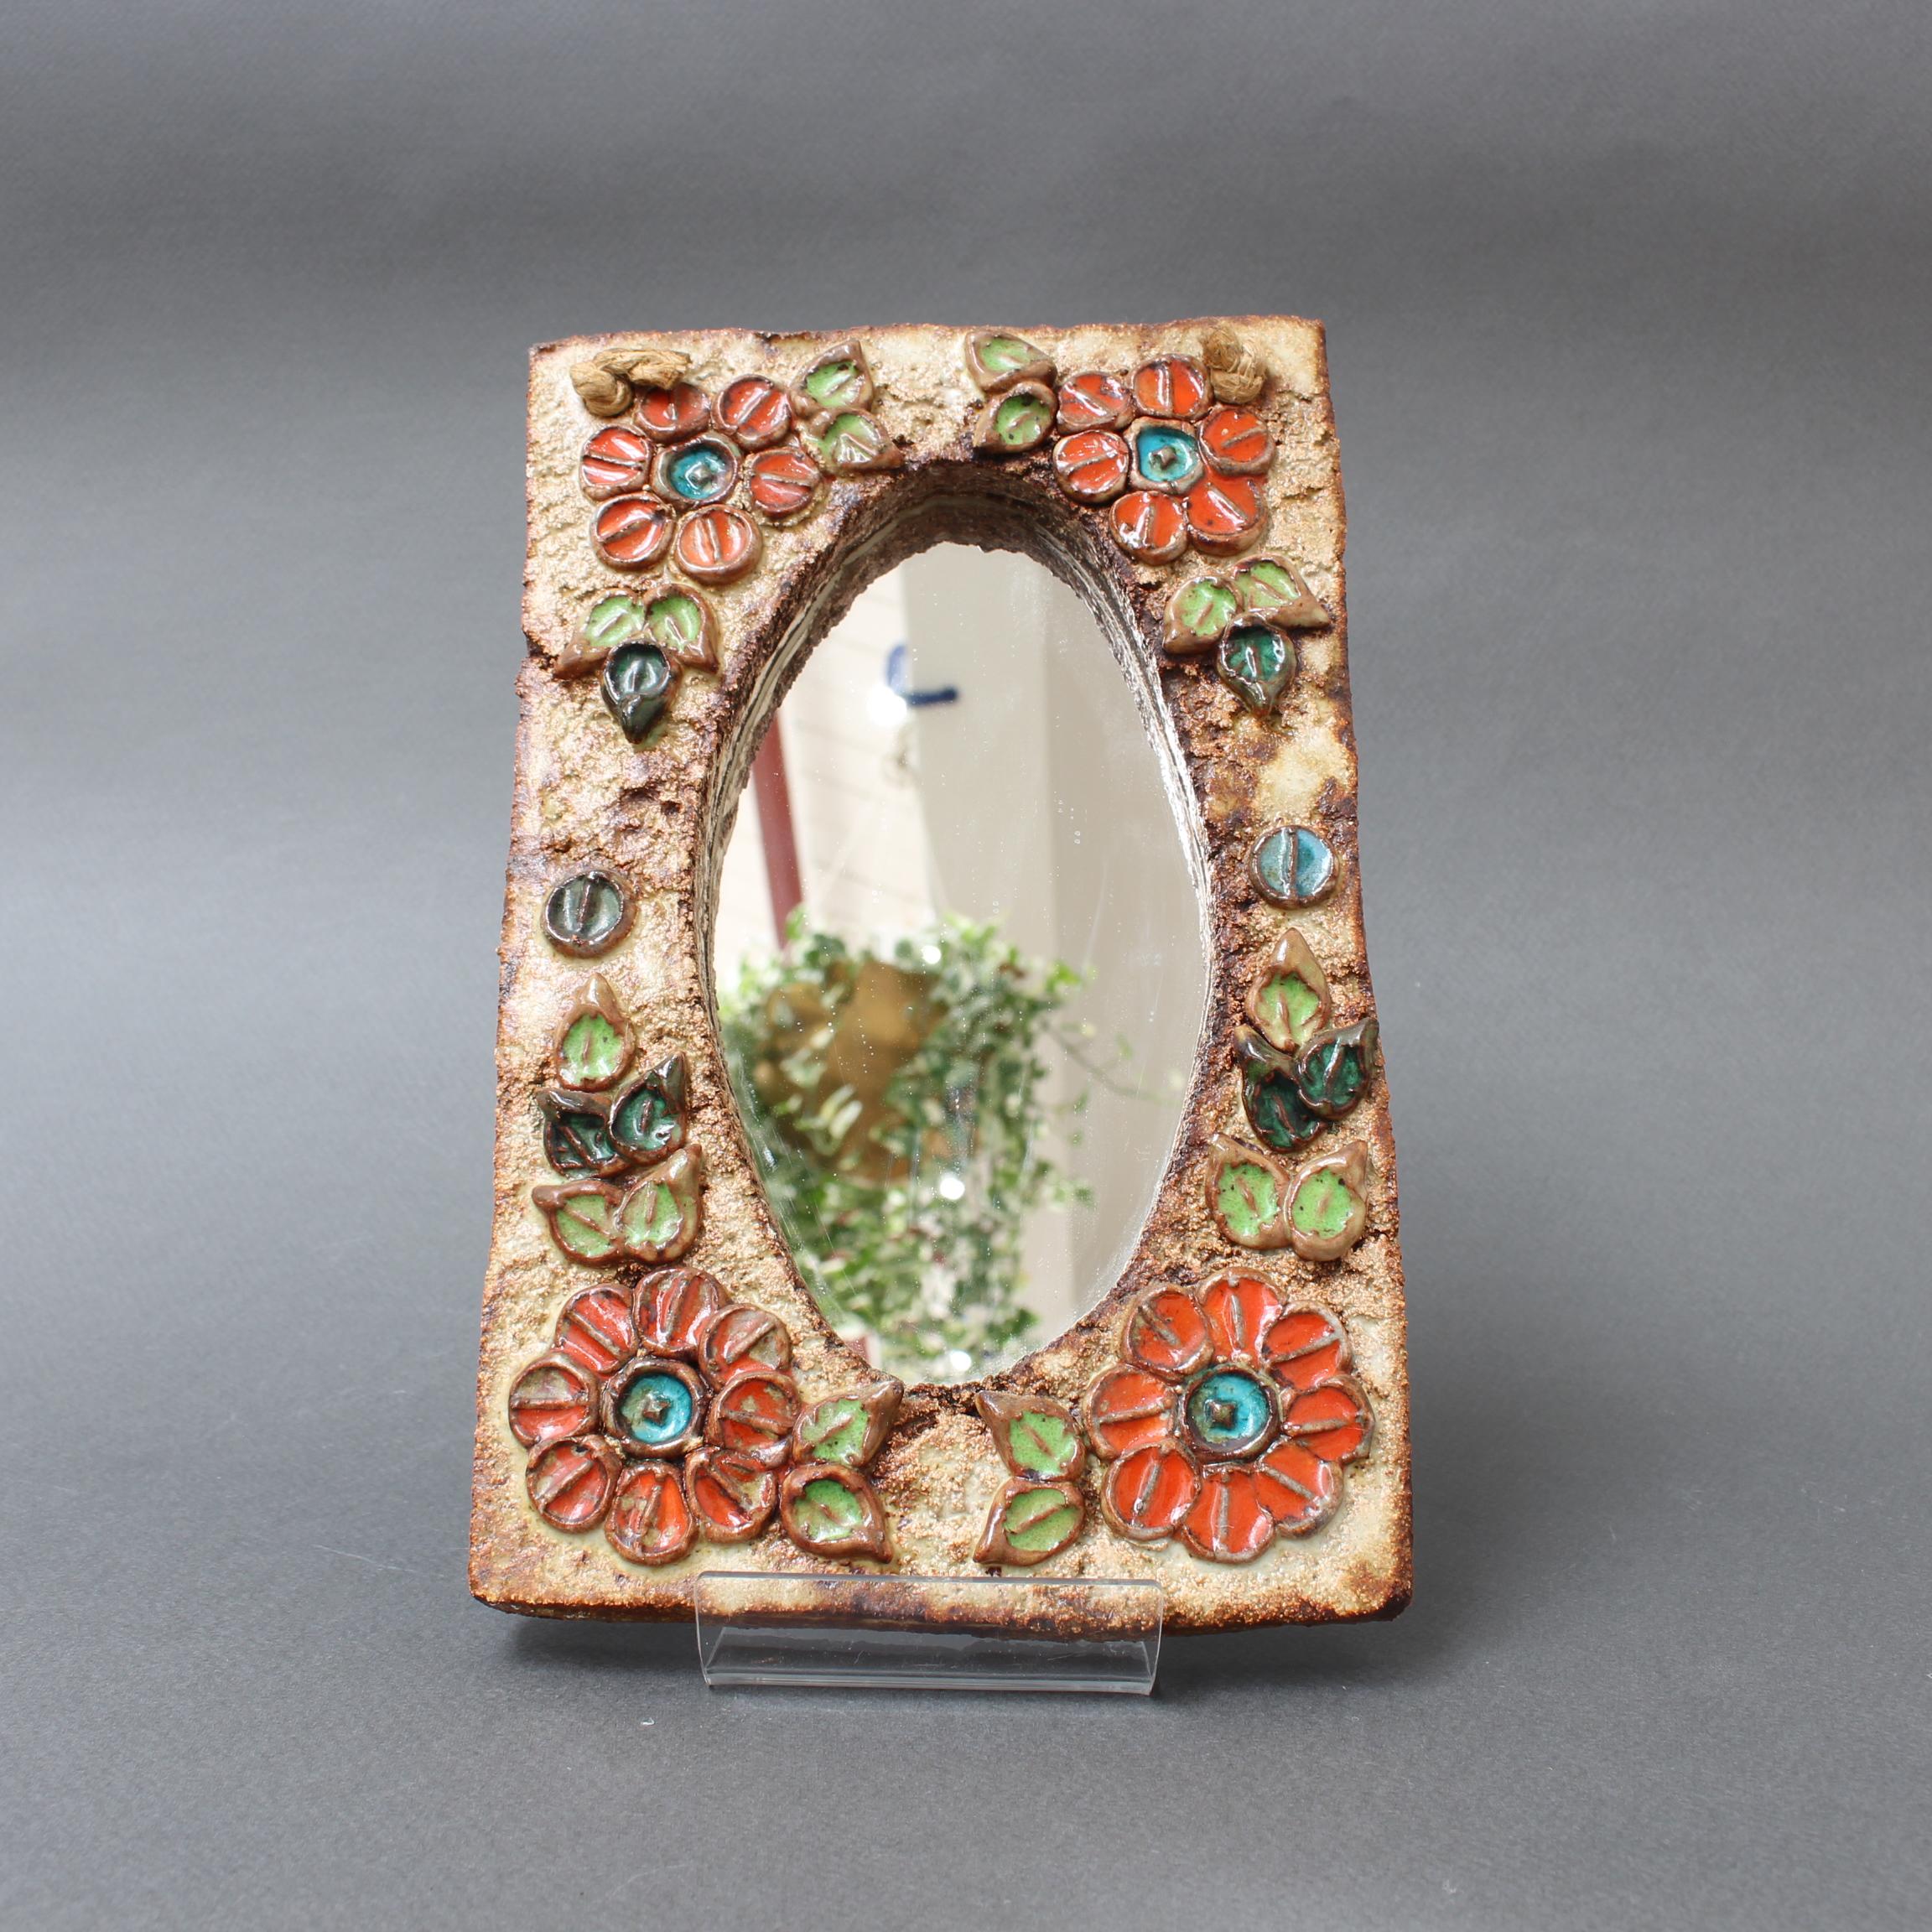 Ceramic flower-motif wall mirror with glazed leaves by La Roue, Vallauris, France (circa 1960s). A charming, decorative diminutive piece with rustic but colourful details surrounding the stylish oval glass. In good vintage condition showing